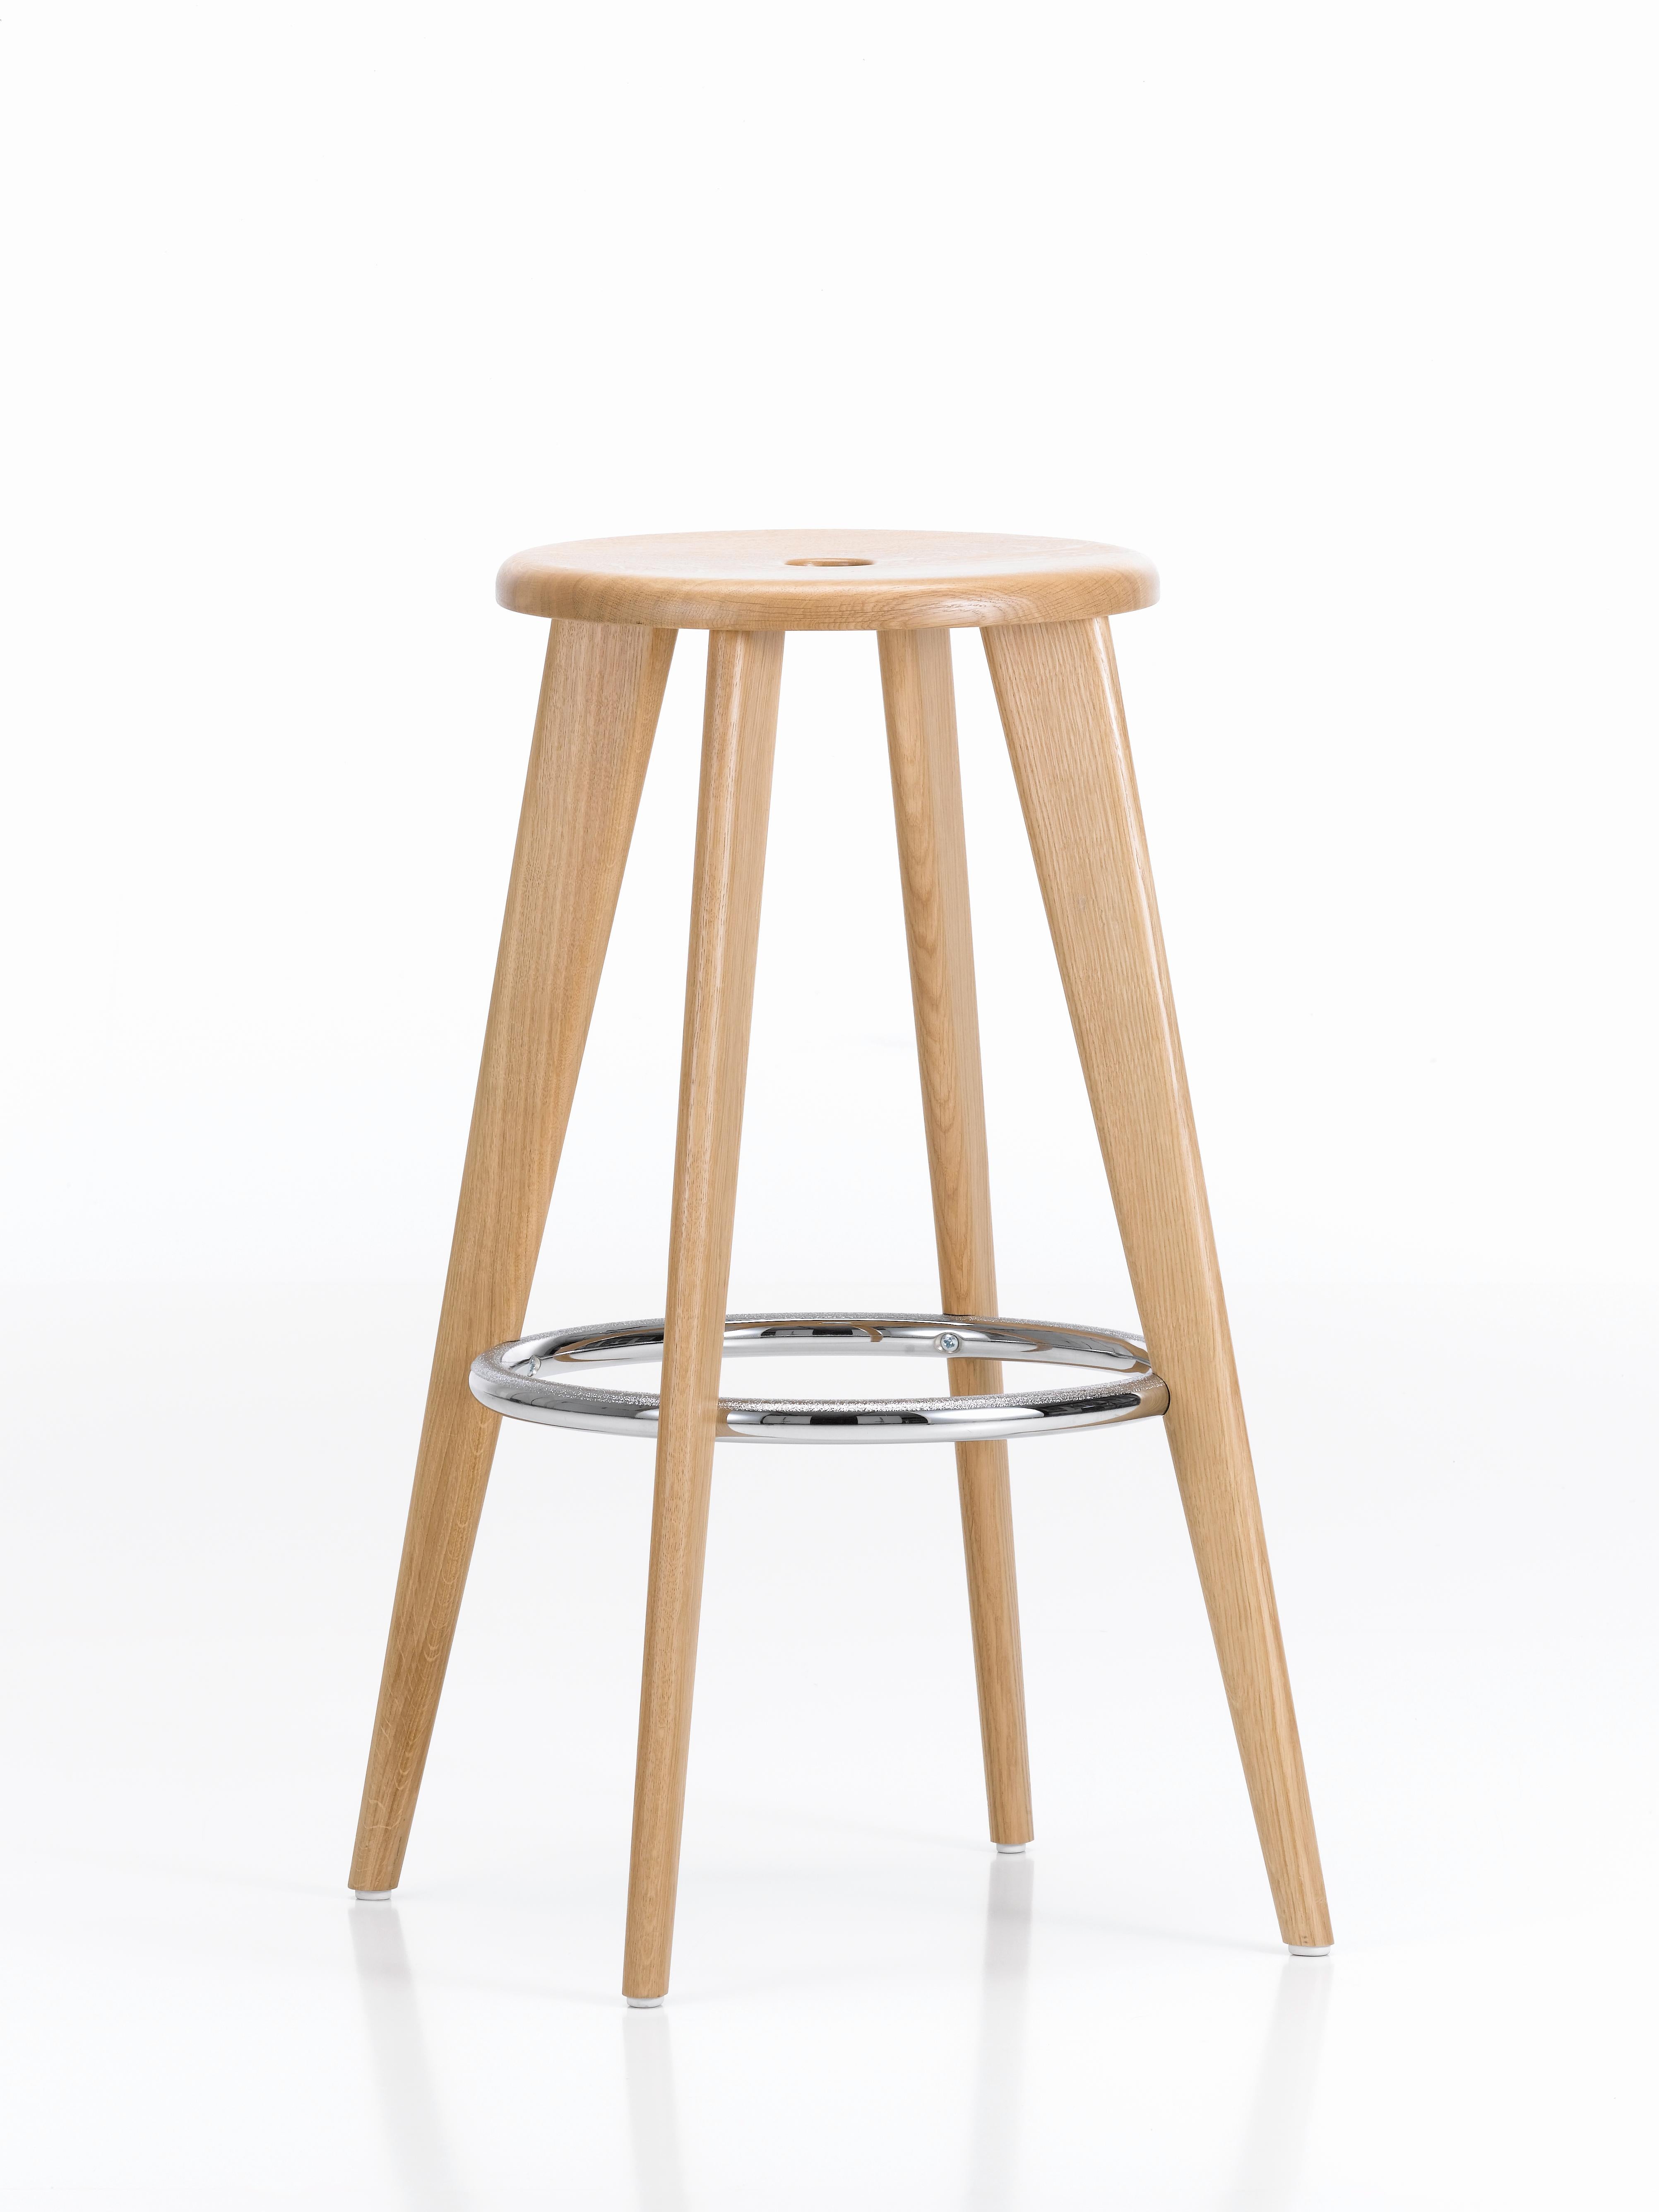 These items are currently only available in the United States.

For the design of Tabouret Haut, Jean Prouvé drew on a traditional type of bar stool that is still in common use today: a thin round seat resting on top of four long, canted legs. A